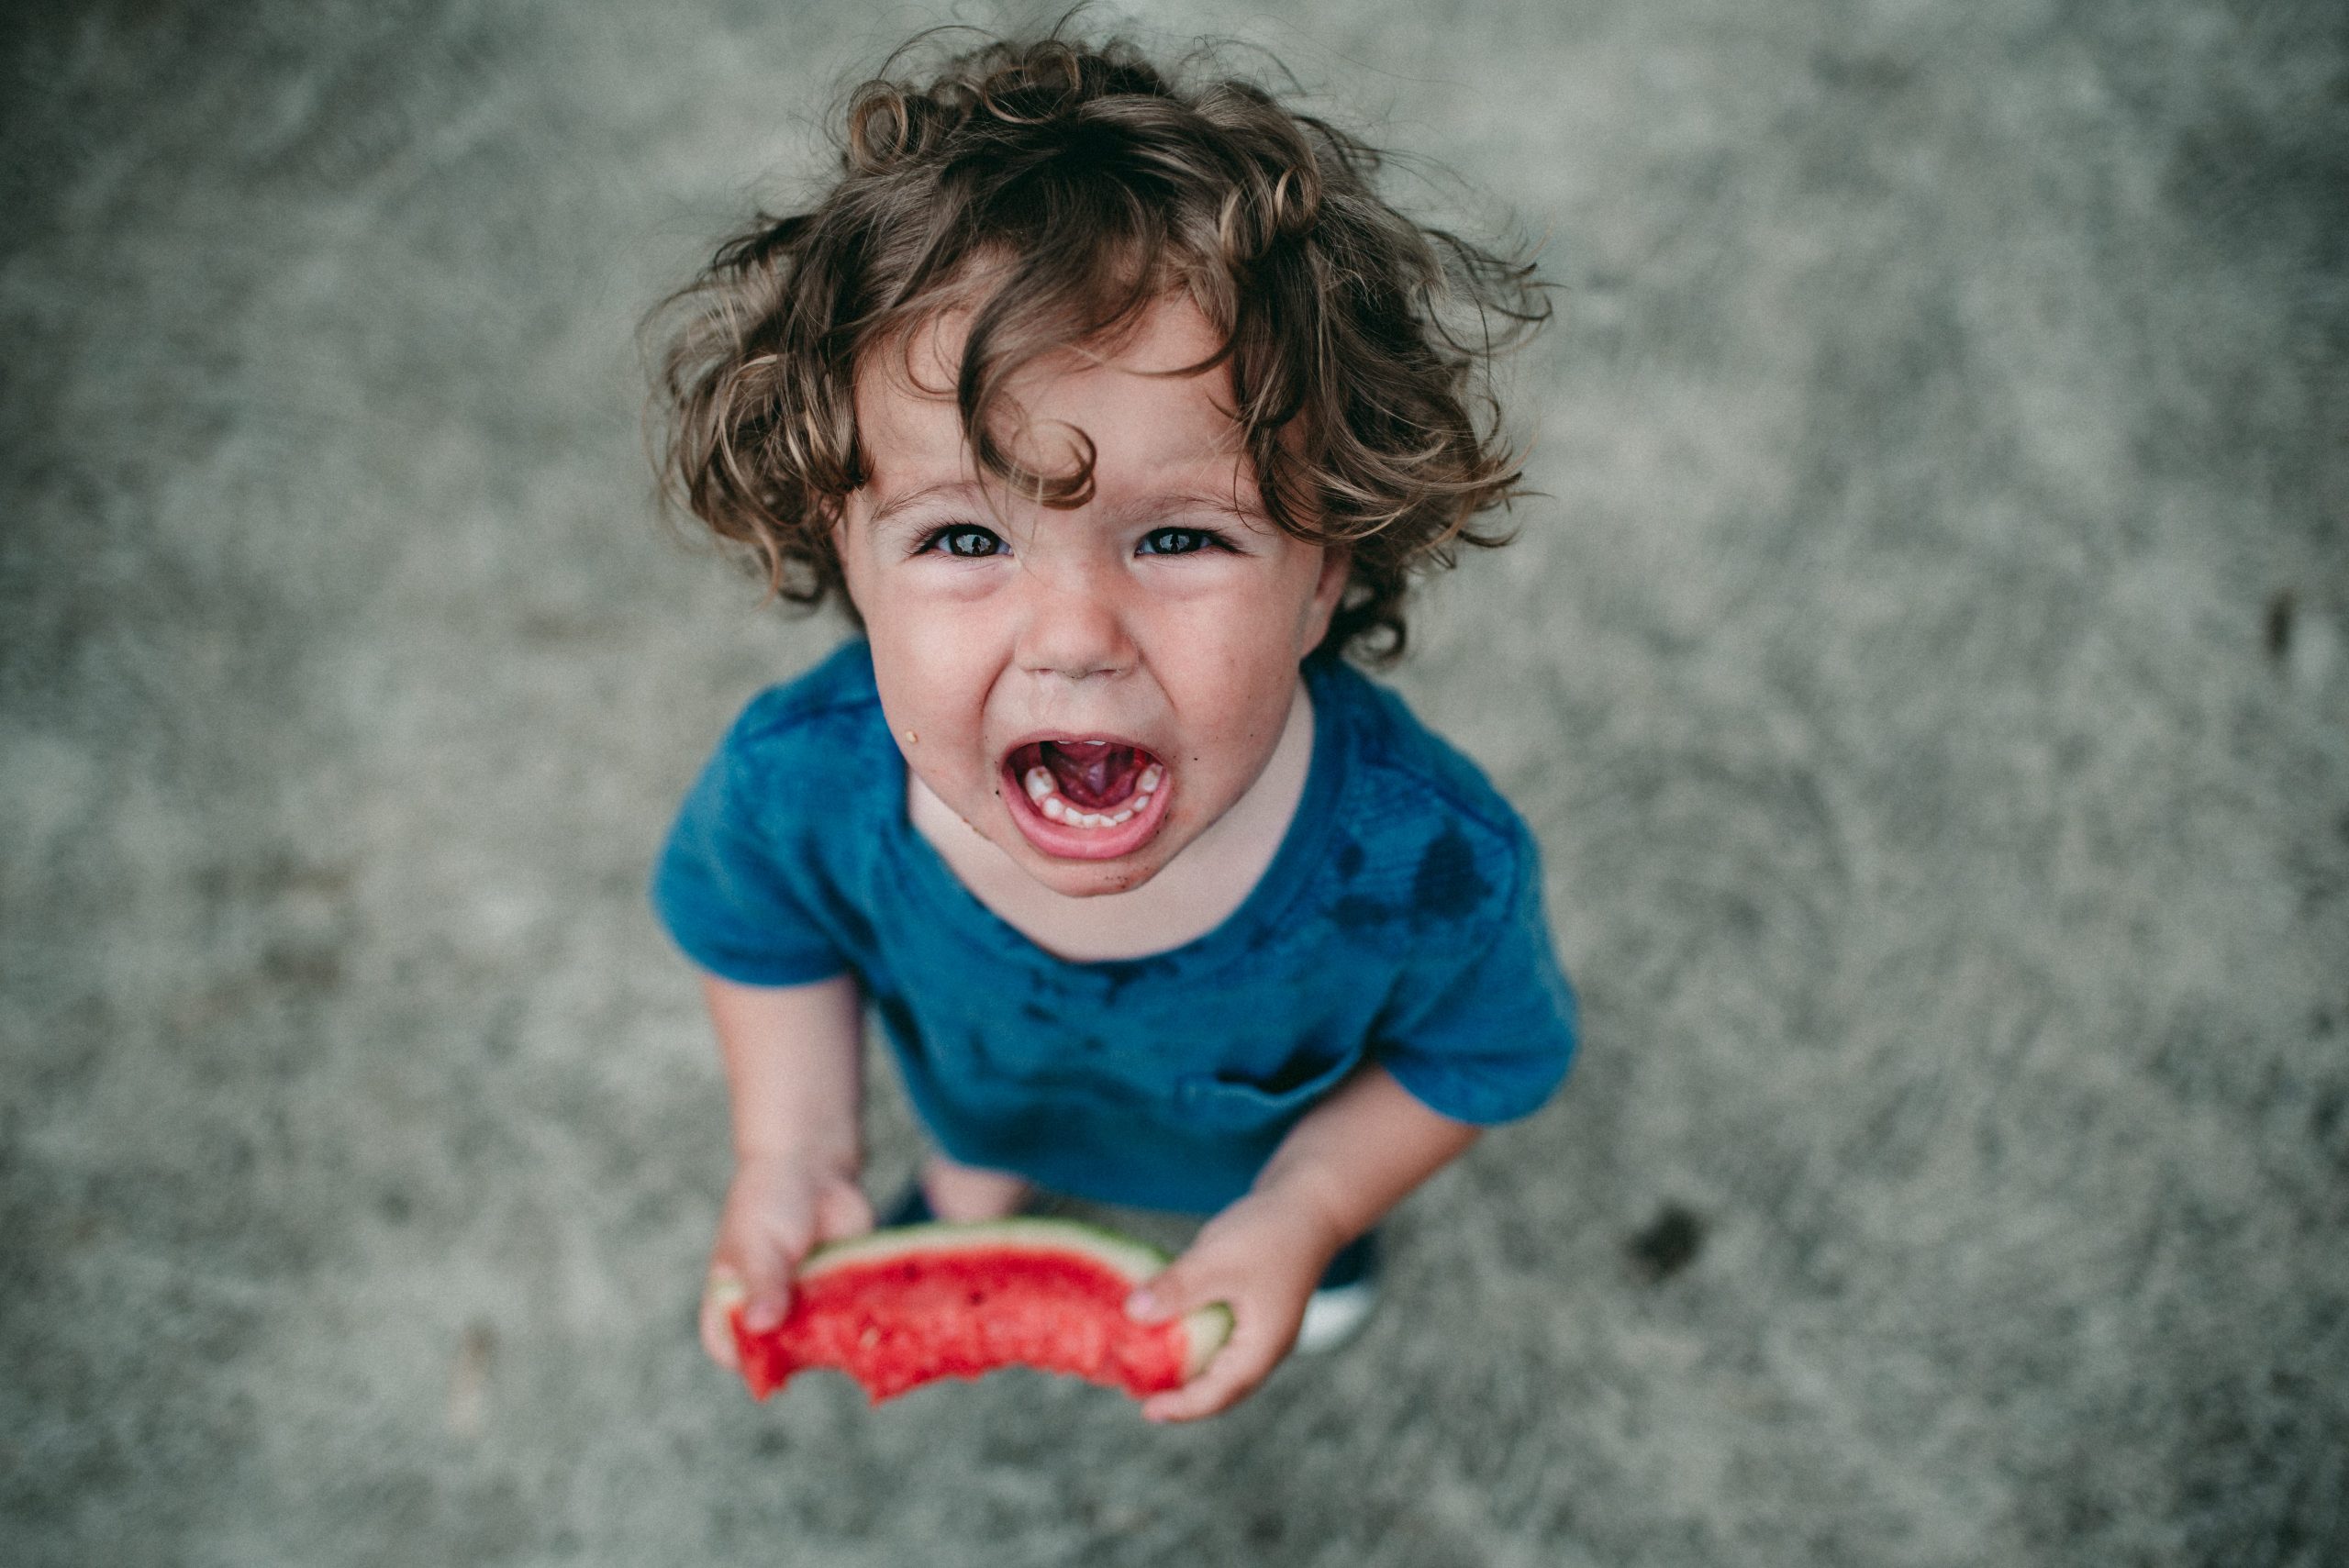 A toddler, shot from above, yells happily with a large piece of watermelon in his hands.